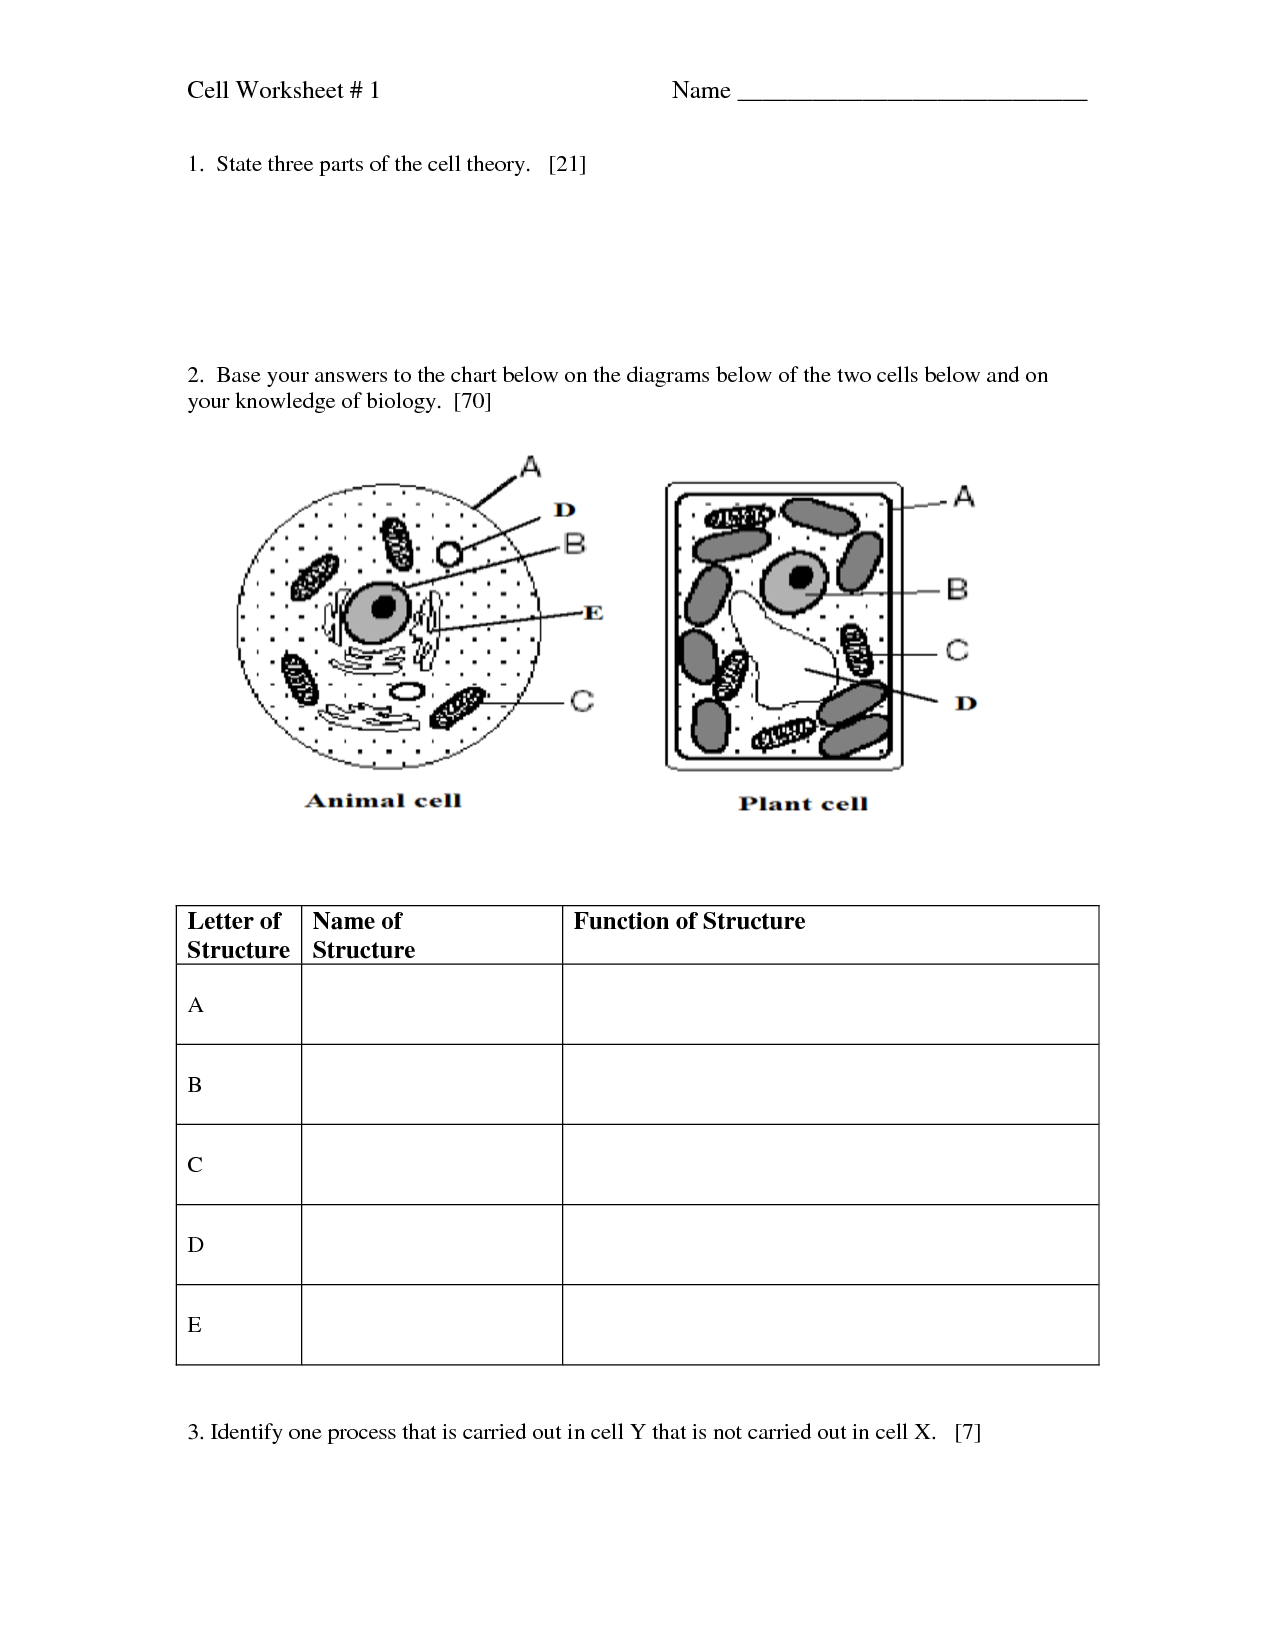 15-best-images-of-cell-theory-worksheet-answers-prokaryotic-and-eukaryotic-cells-worksheet